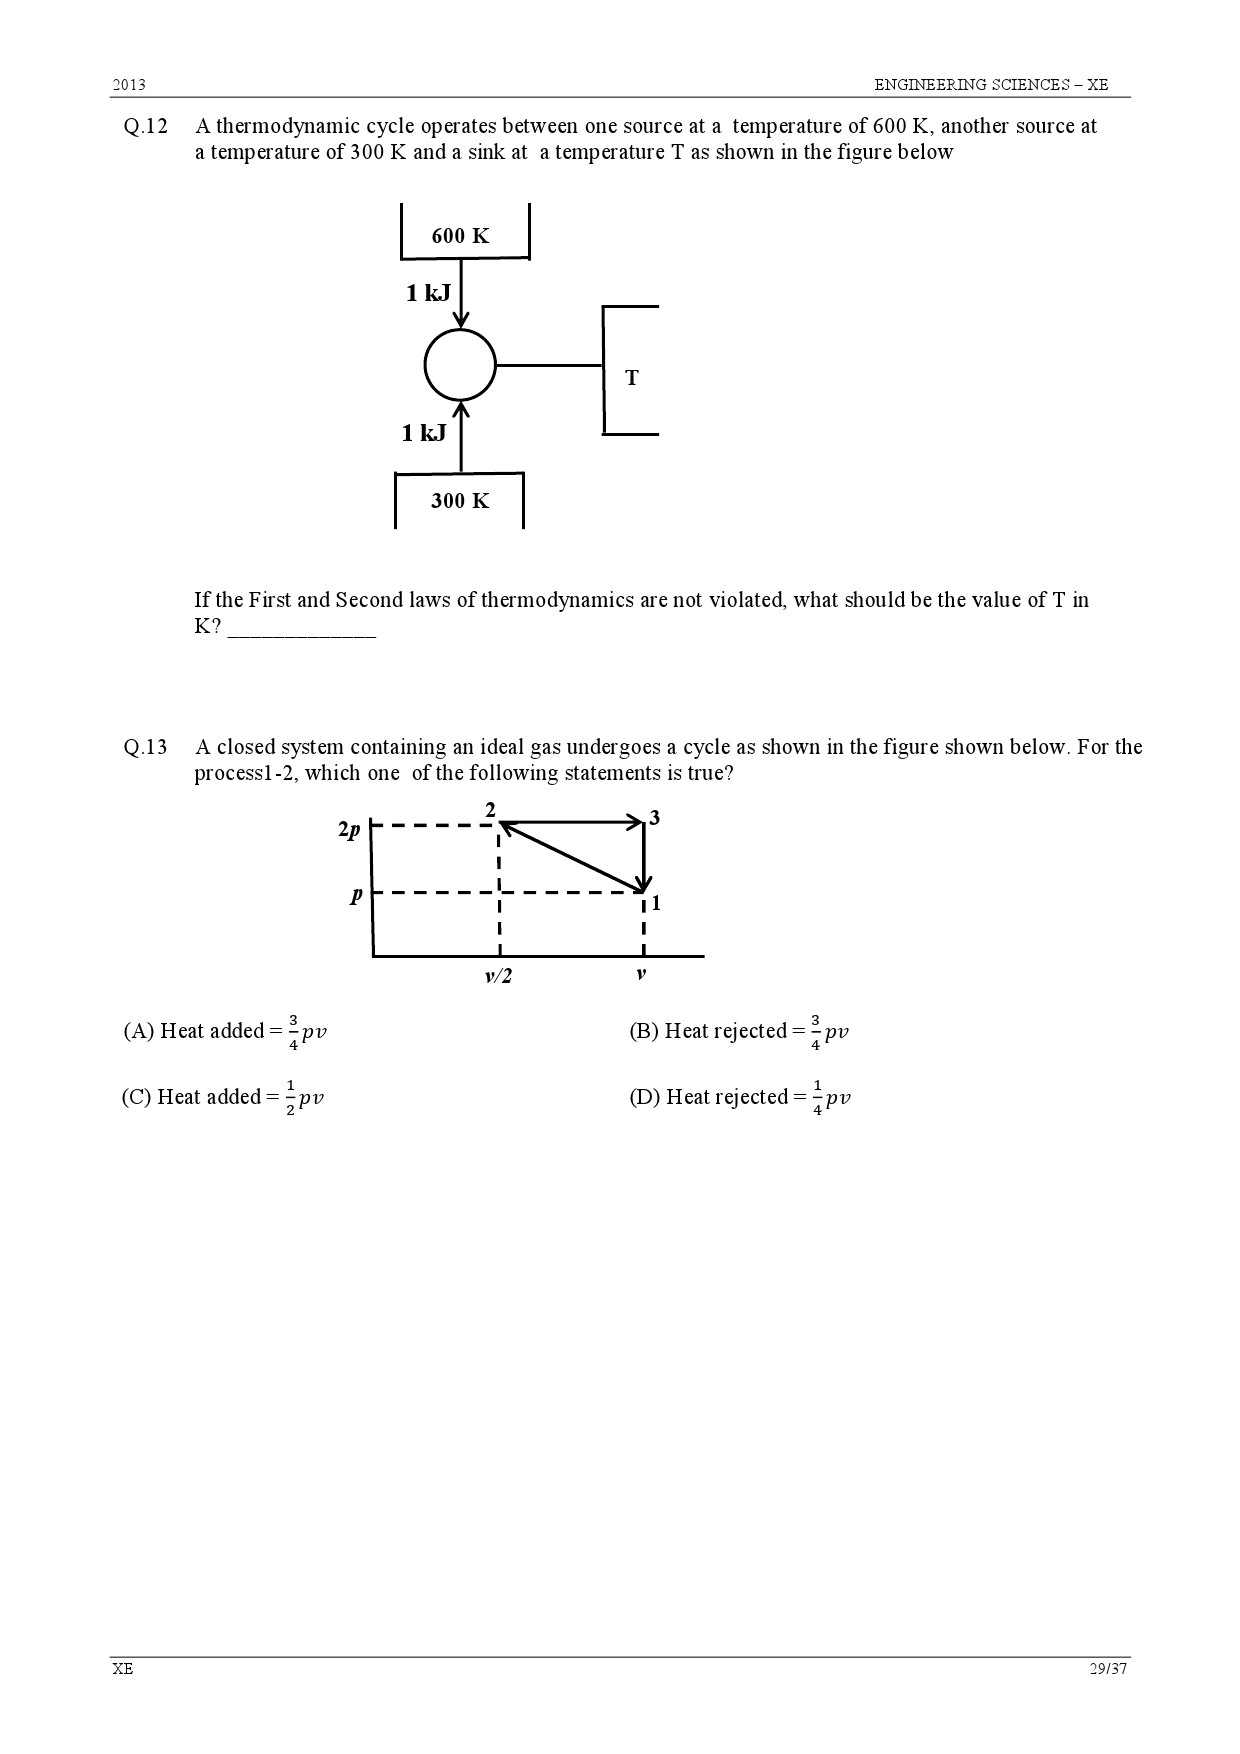 GATE Exam Question Paper 2013 Engineering Sciences 29